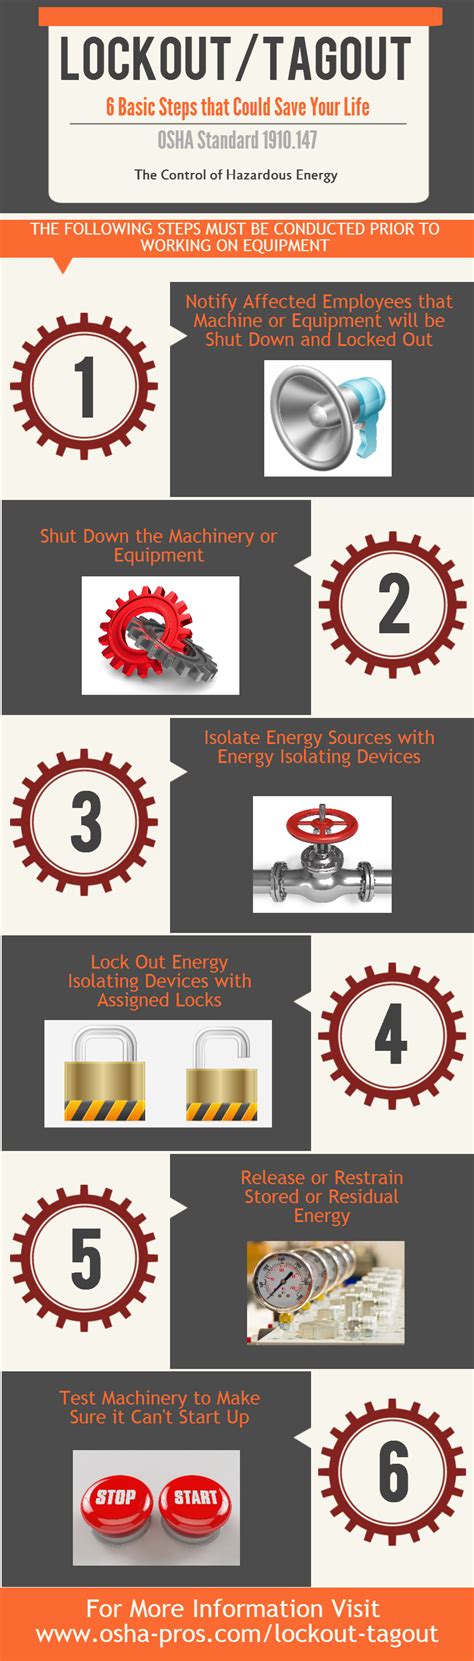 Lockouttagout Infographic 6 Critical Steps That Save Lives America